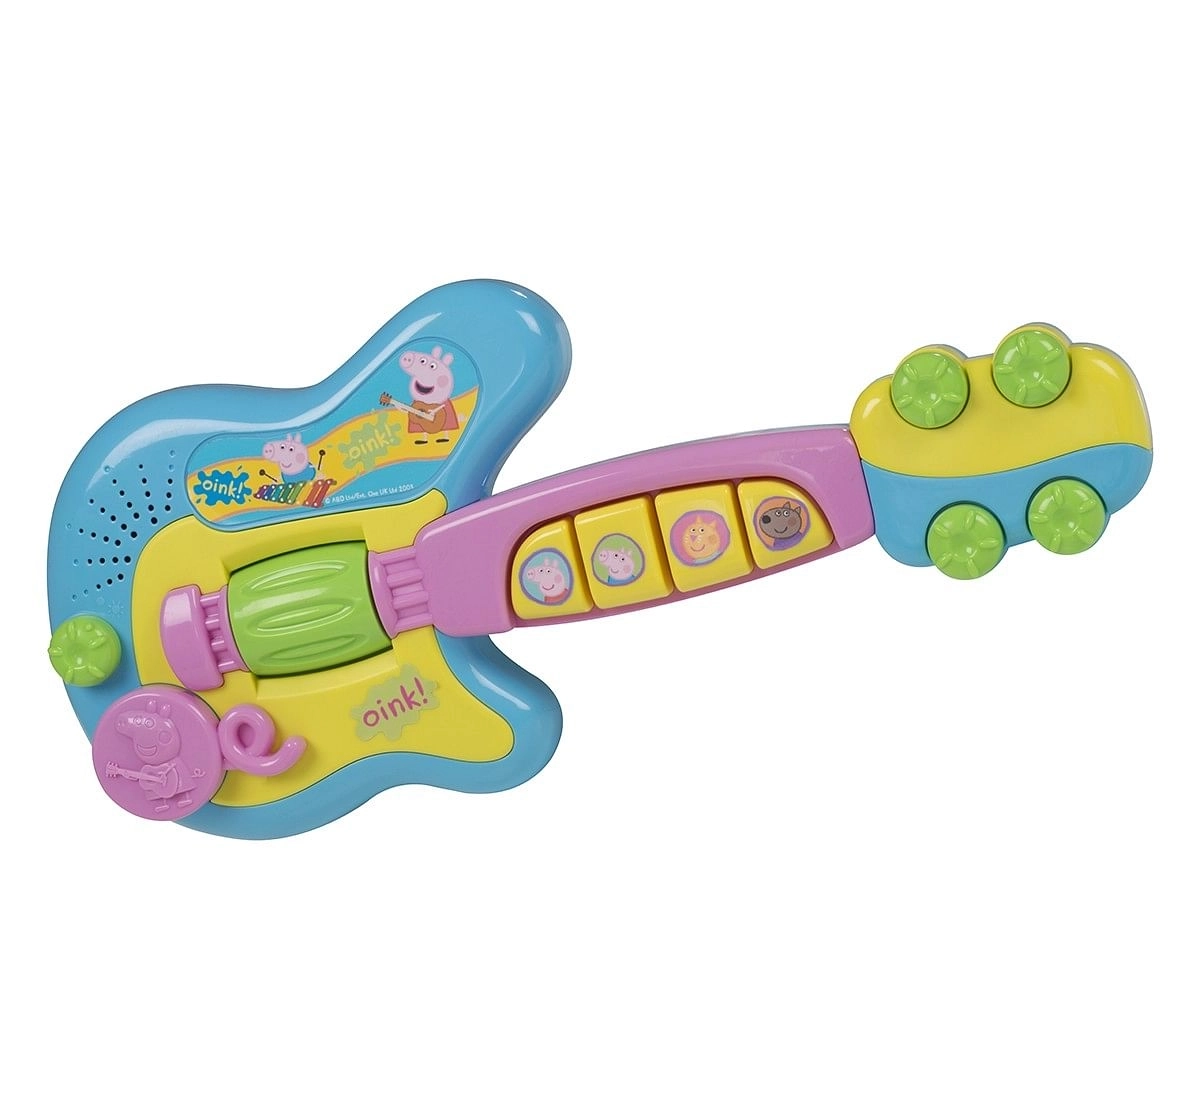 Peppa Pig - Electronic Guitar Guitars & String Instruments for Kids age 18M + 